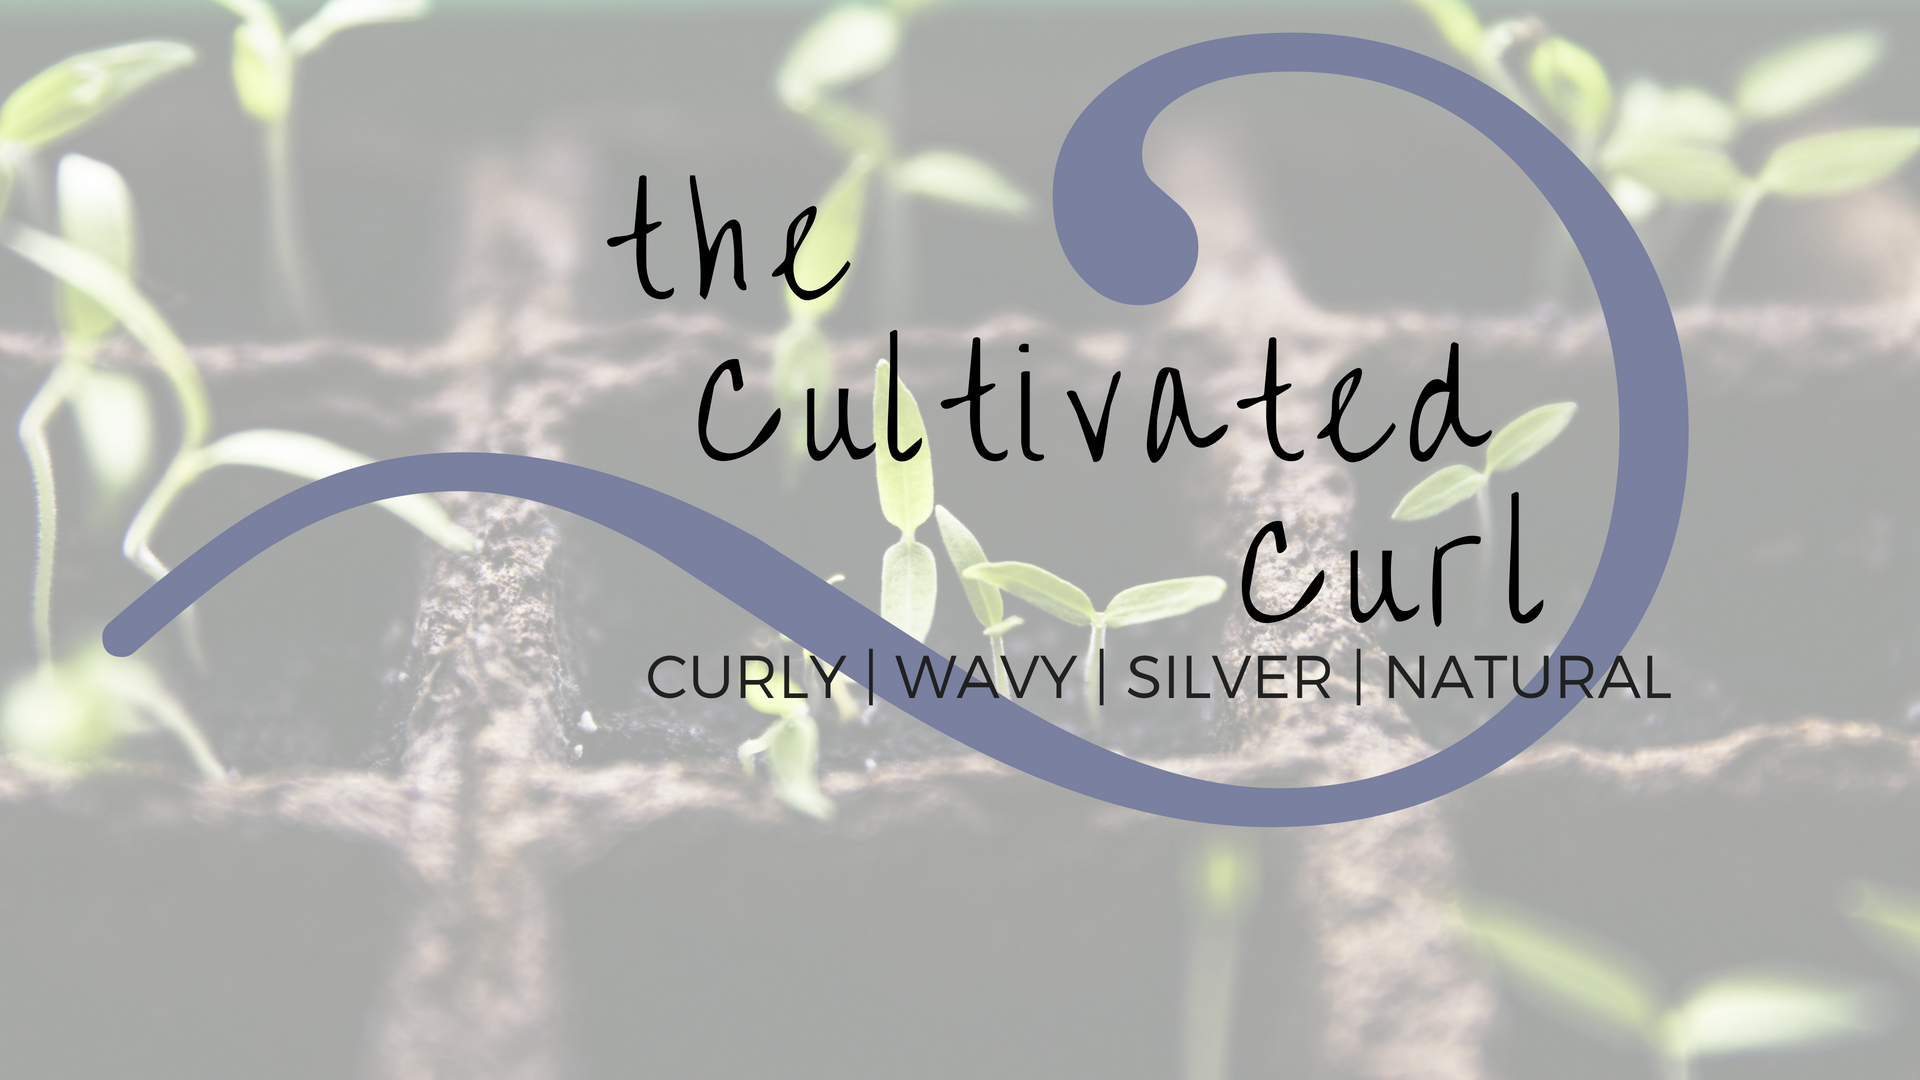 The Cultivated Curl